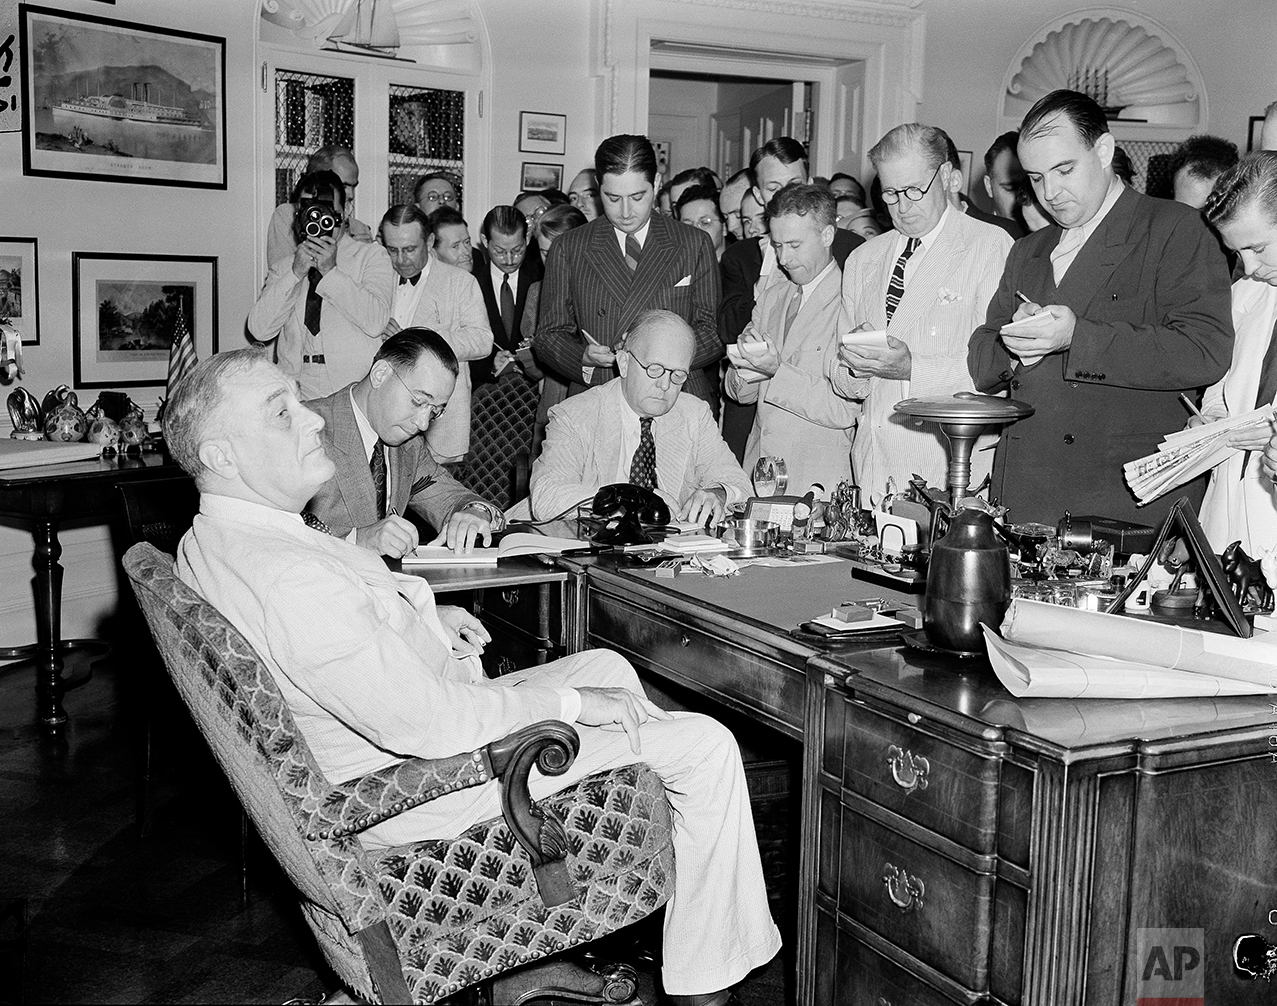  White House reporters, straining to hear every word, crowd around the desk of President Franklin D. Roosevelt in the executive office in Washington, D.C., Aug. 25, 1939, to hear the president say that he did not regard the present European situation